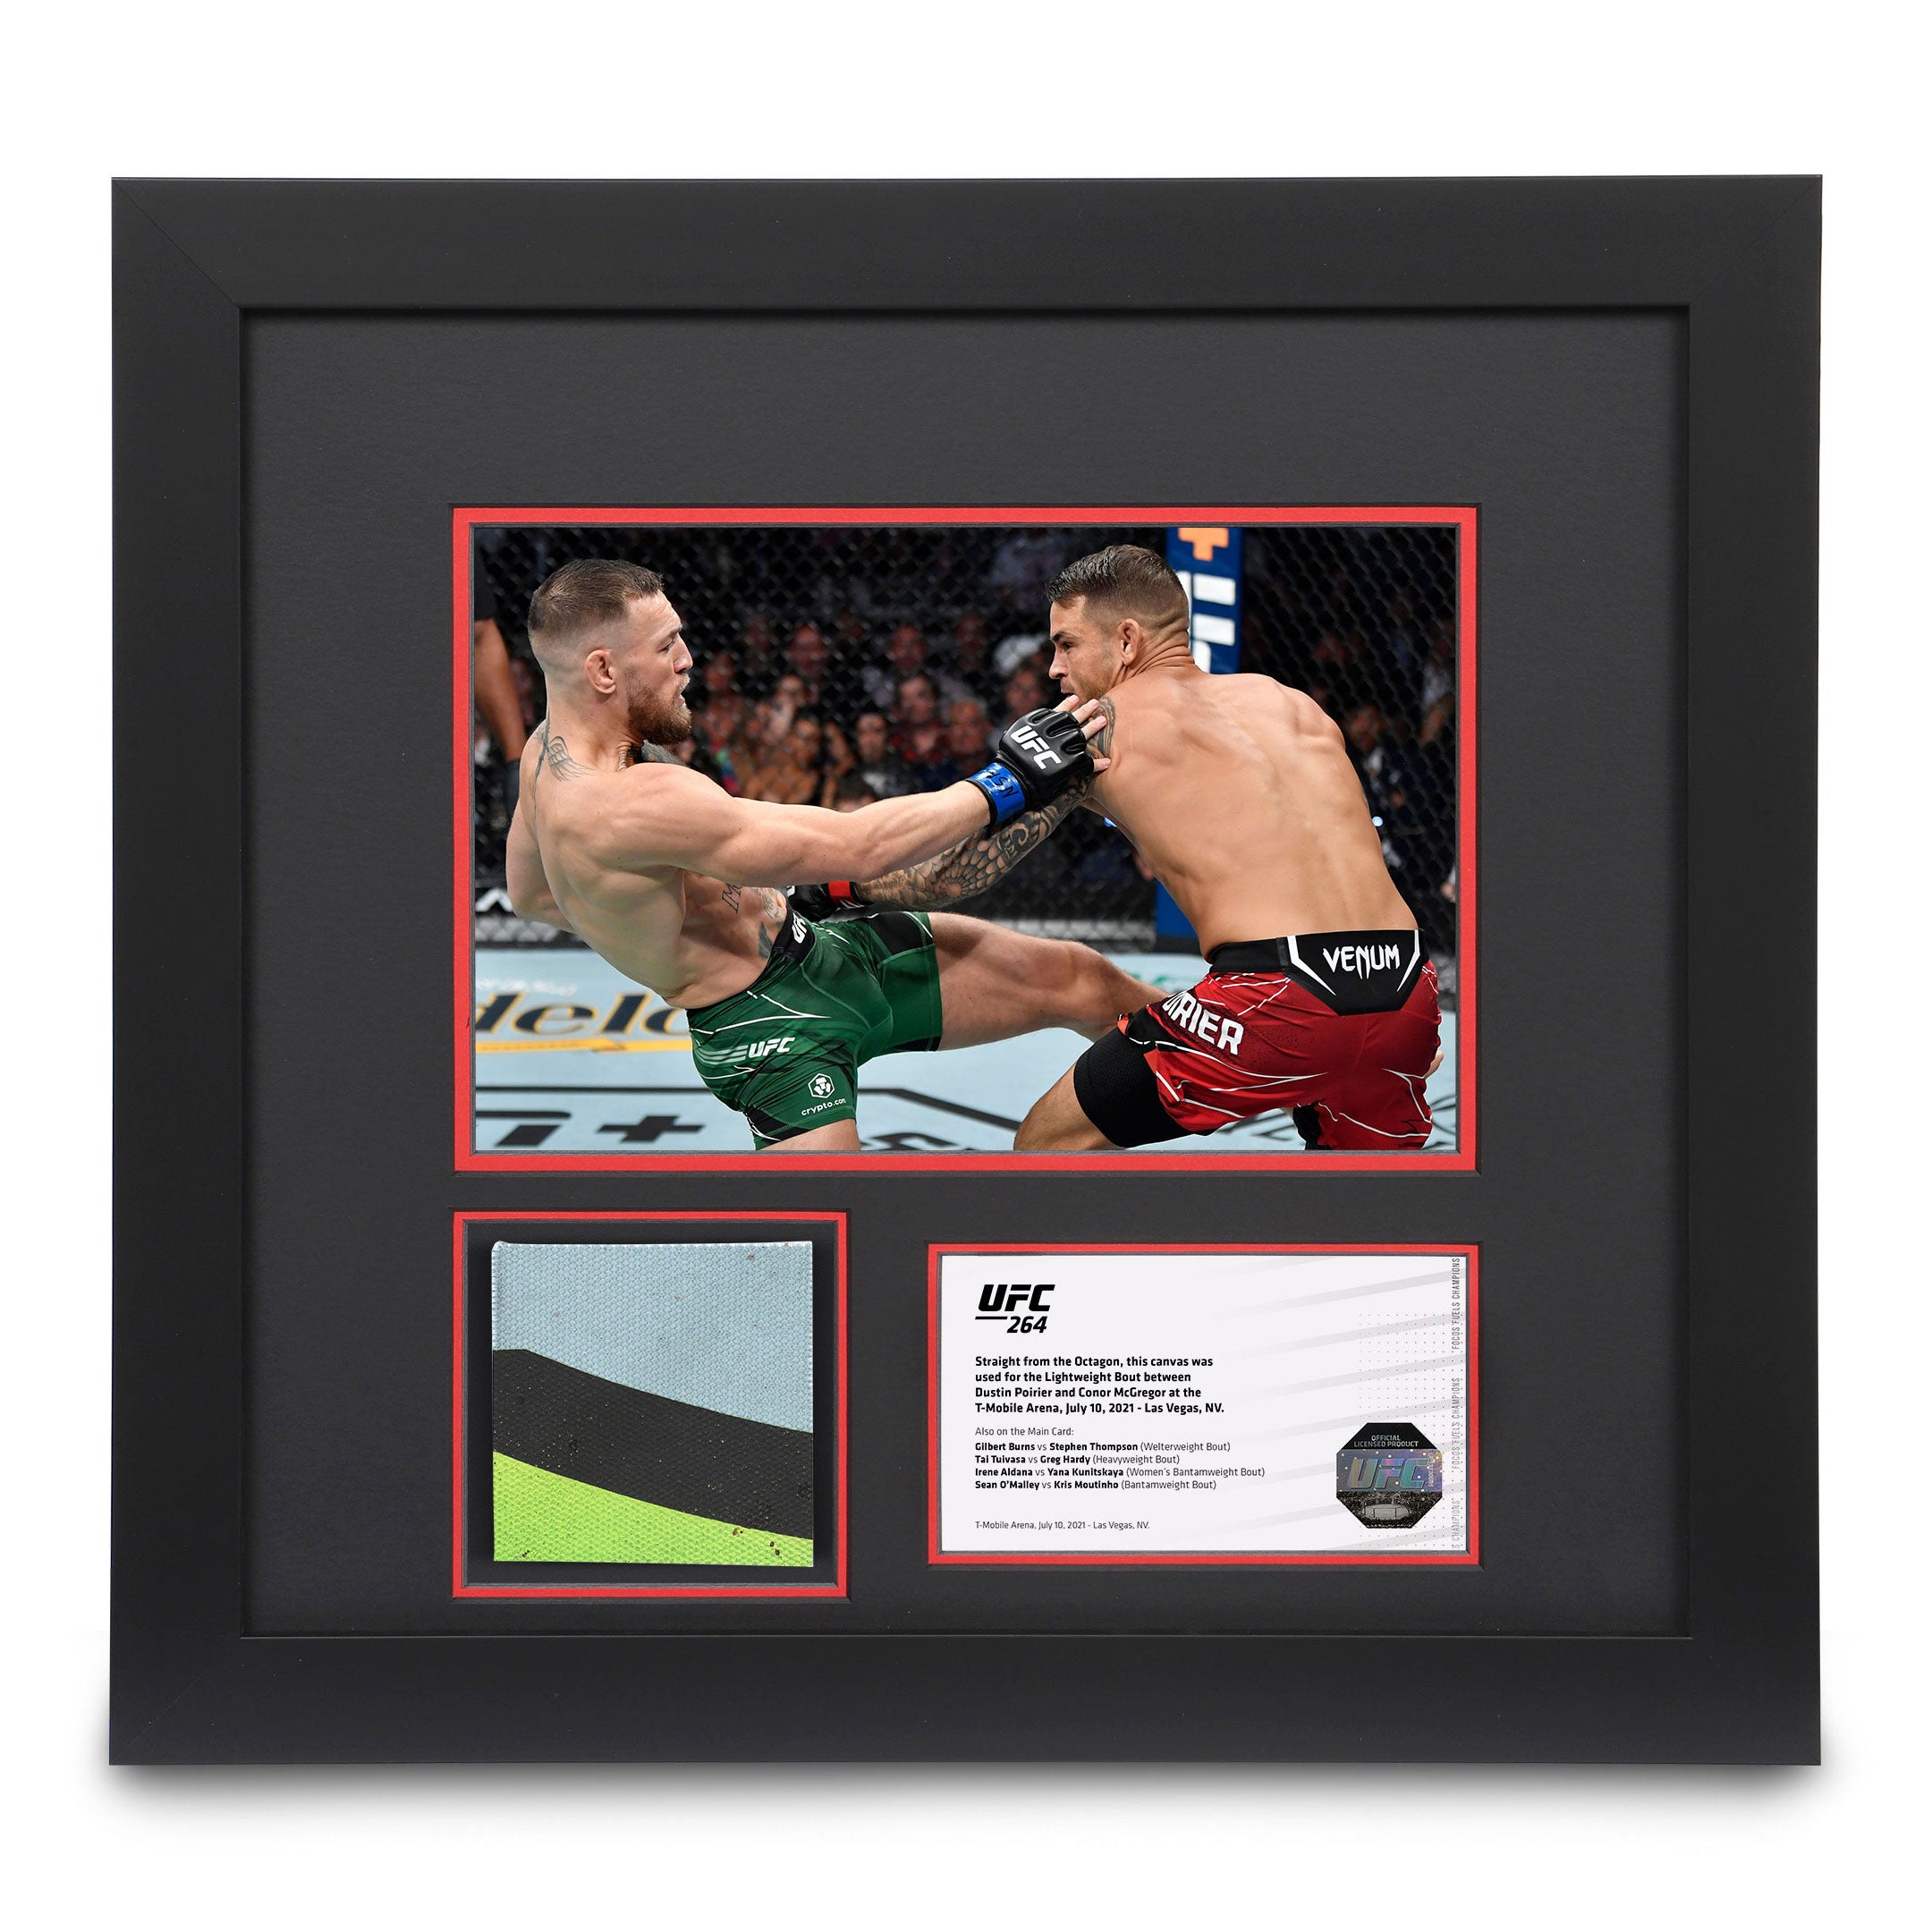 Canvas & Photo from the Poirier vs McGregor UFC 264 event 